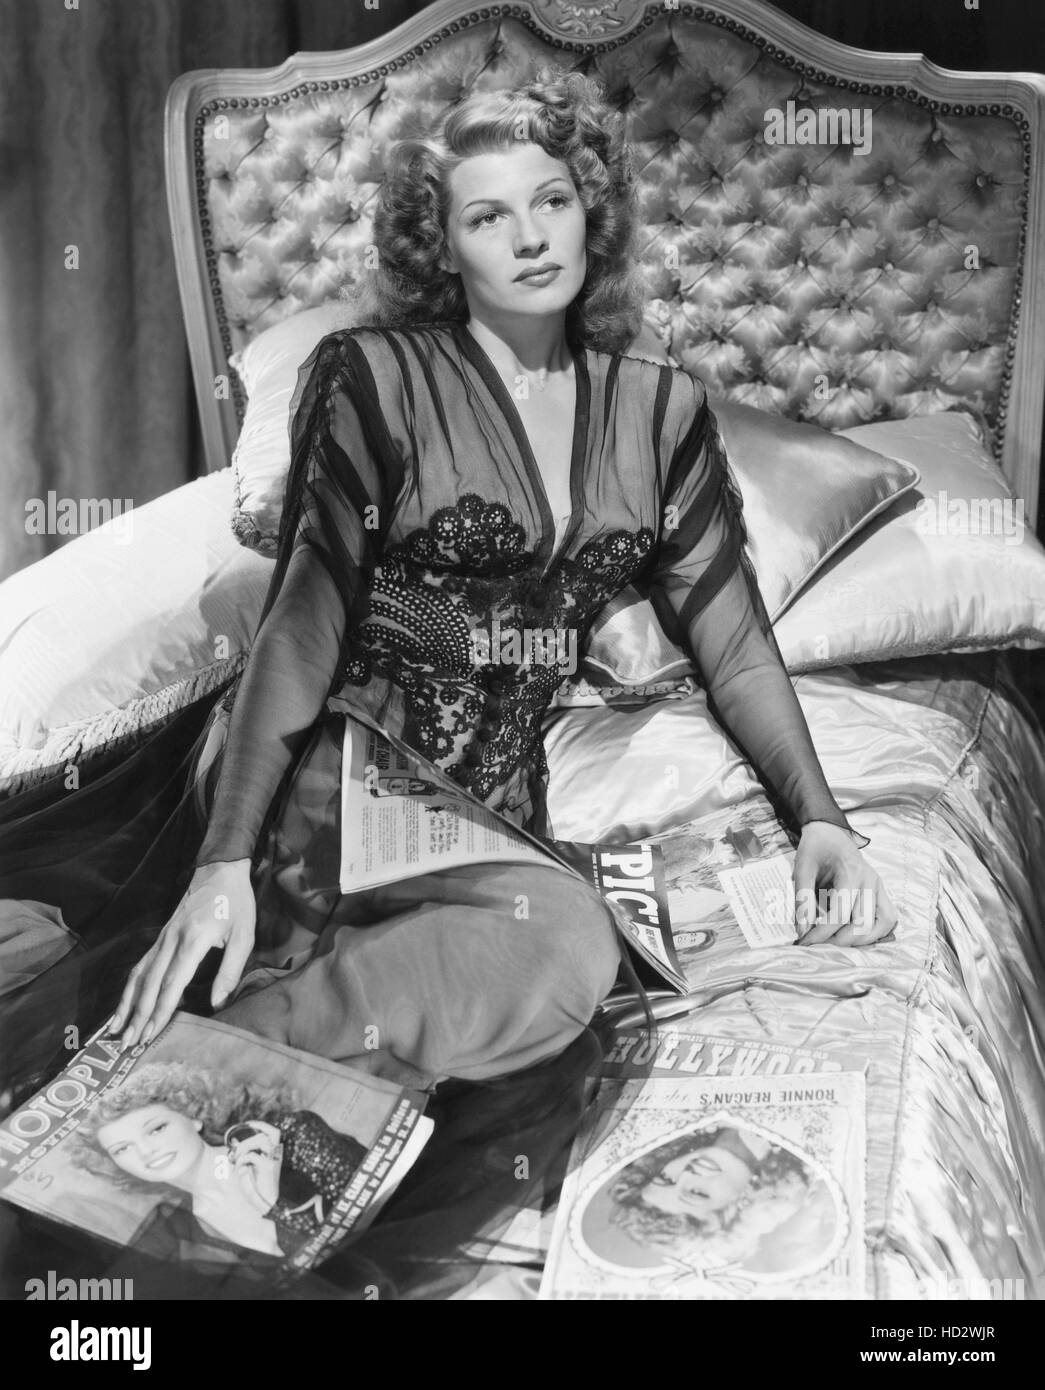 Rita Hayworth sitting on a bed with movie magazines featuring her image ...